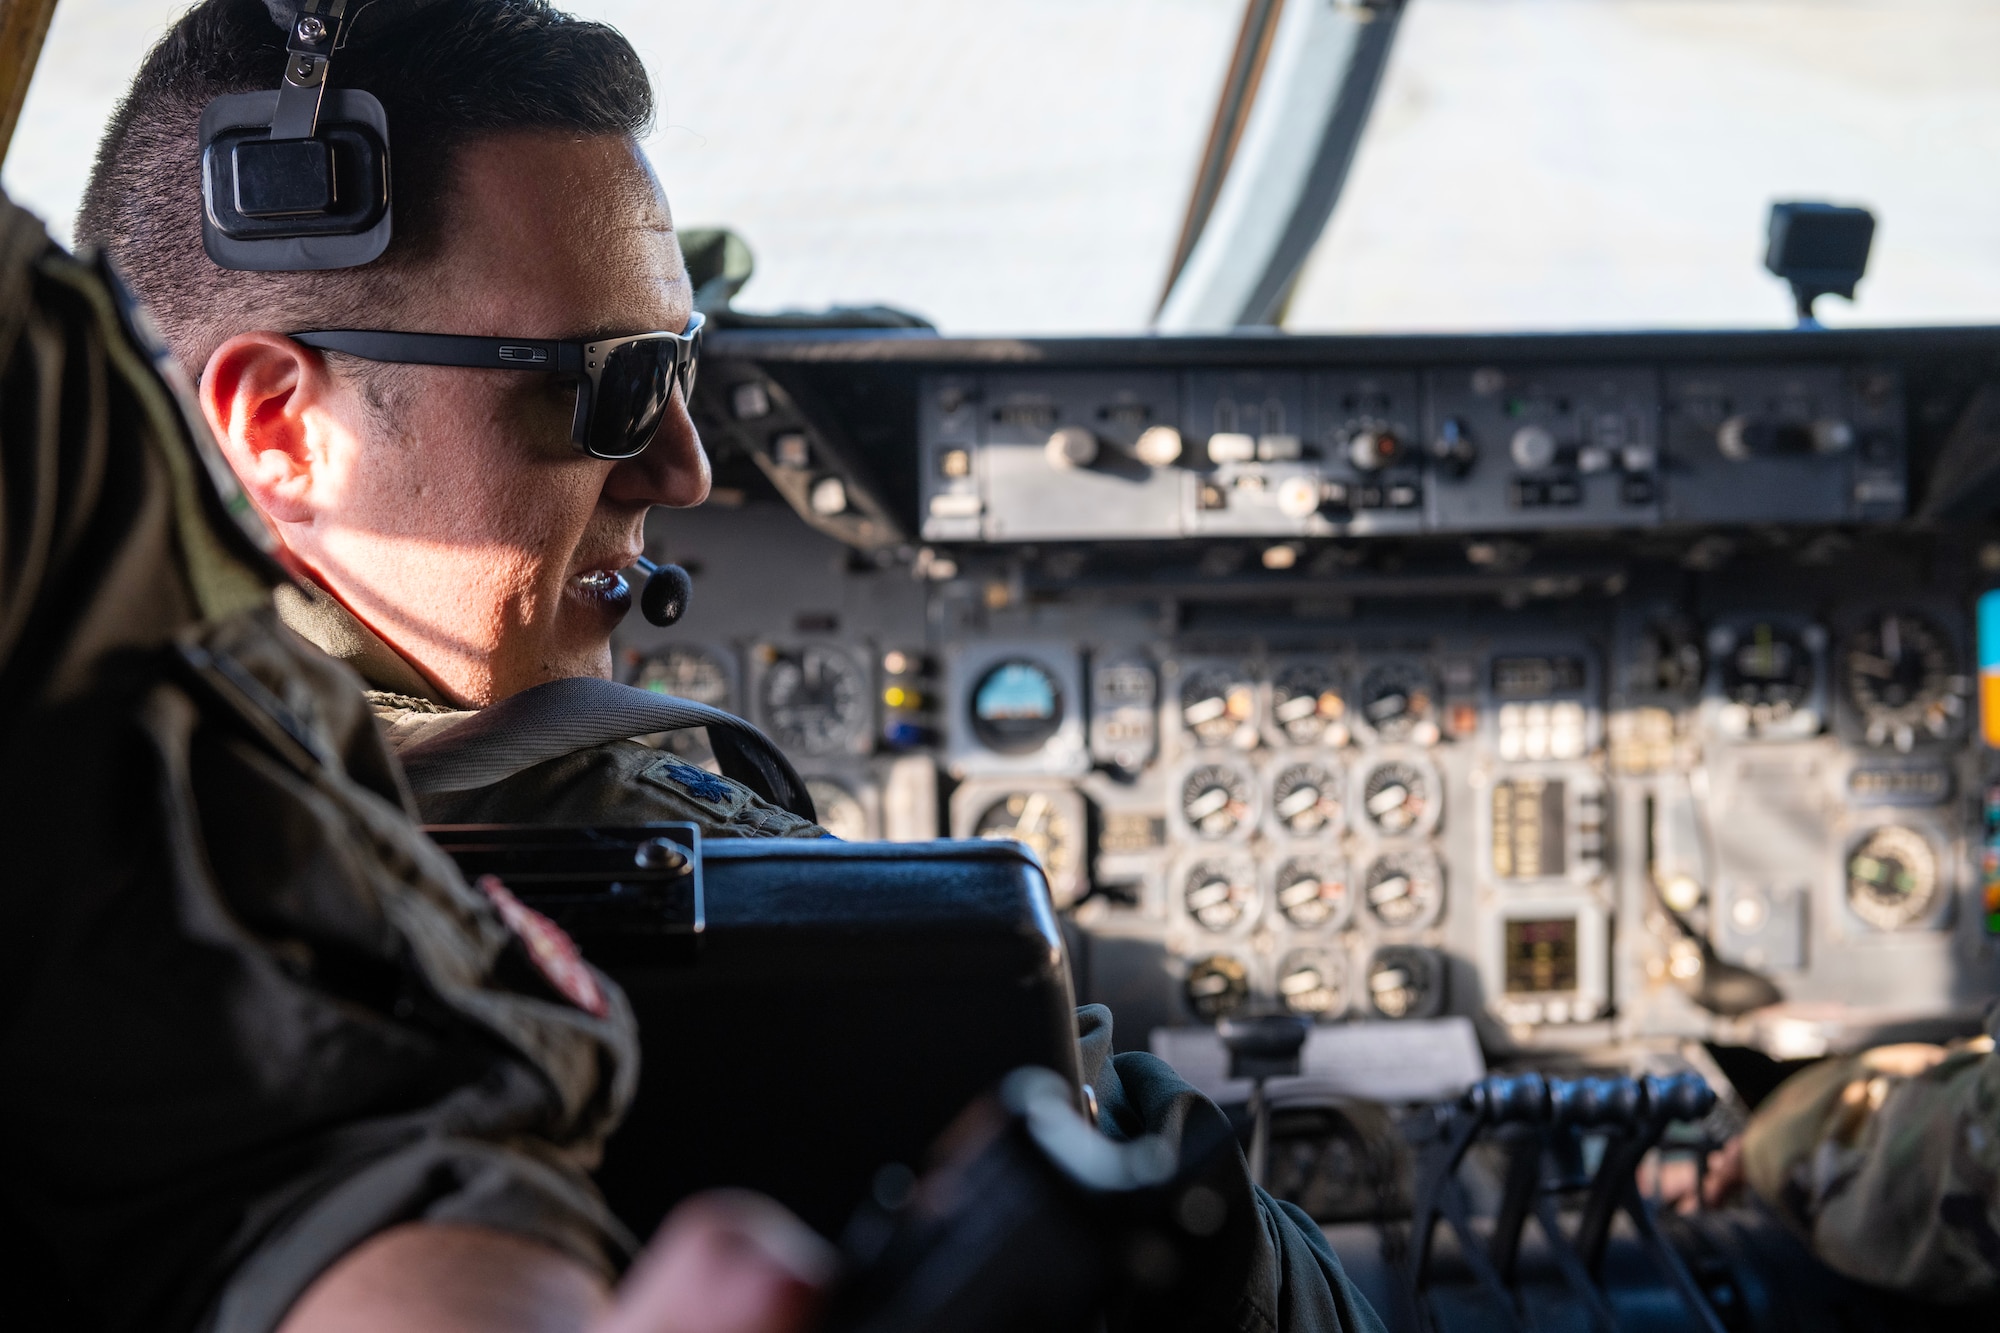 U.S. Air Force Lt. Col. Andrew Baer, 9th Air Refueling Squadron commander and KC-10 Extender pilot, communicates to fellow aircrew members prior to starting engines on the aircraft.